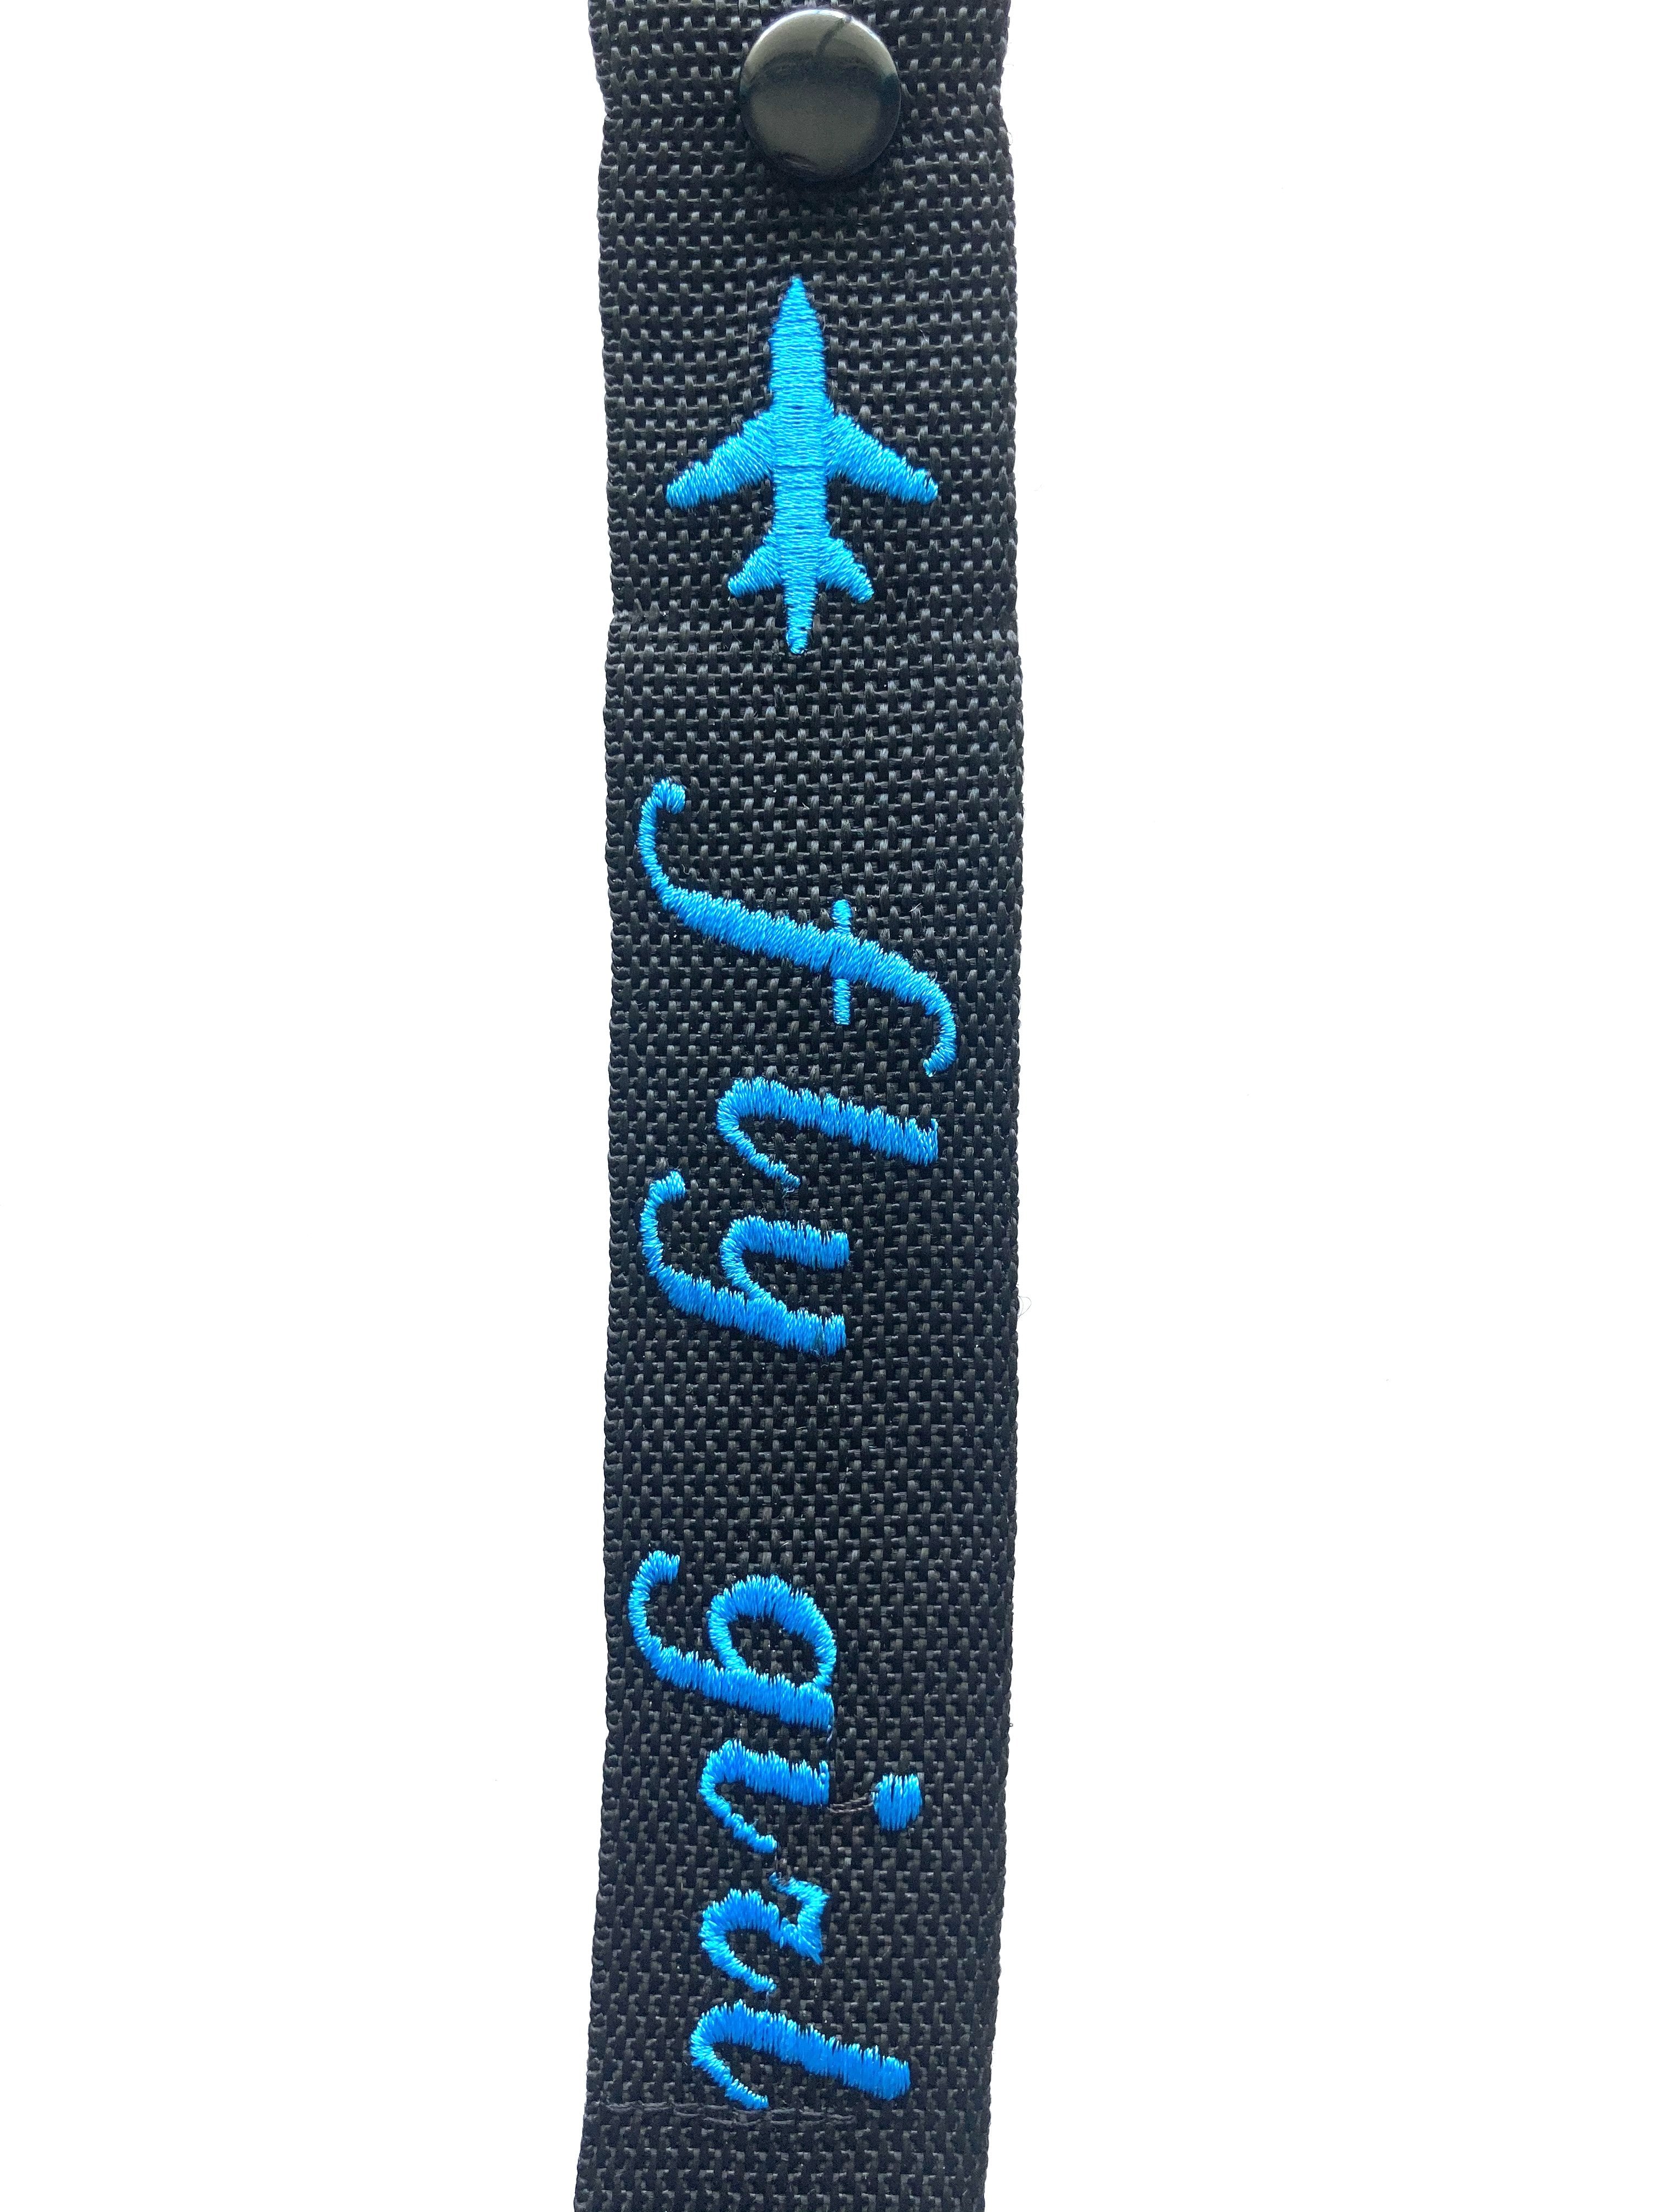 AIRLINE LINGO LUGGAGE TAGS Fly girl blue